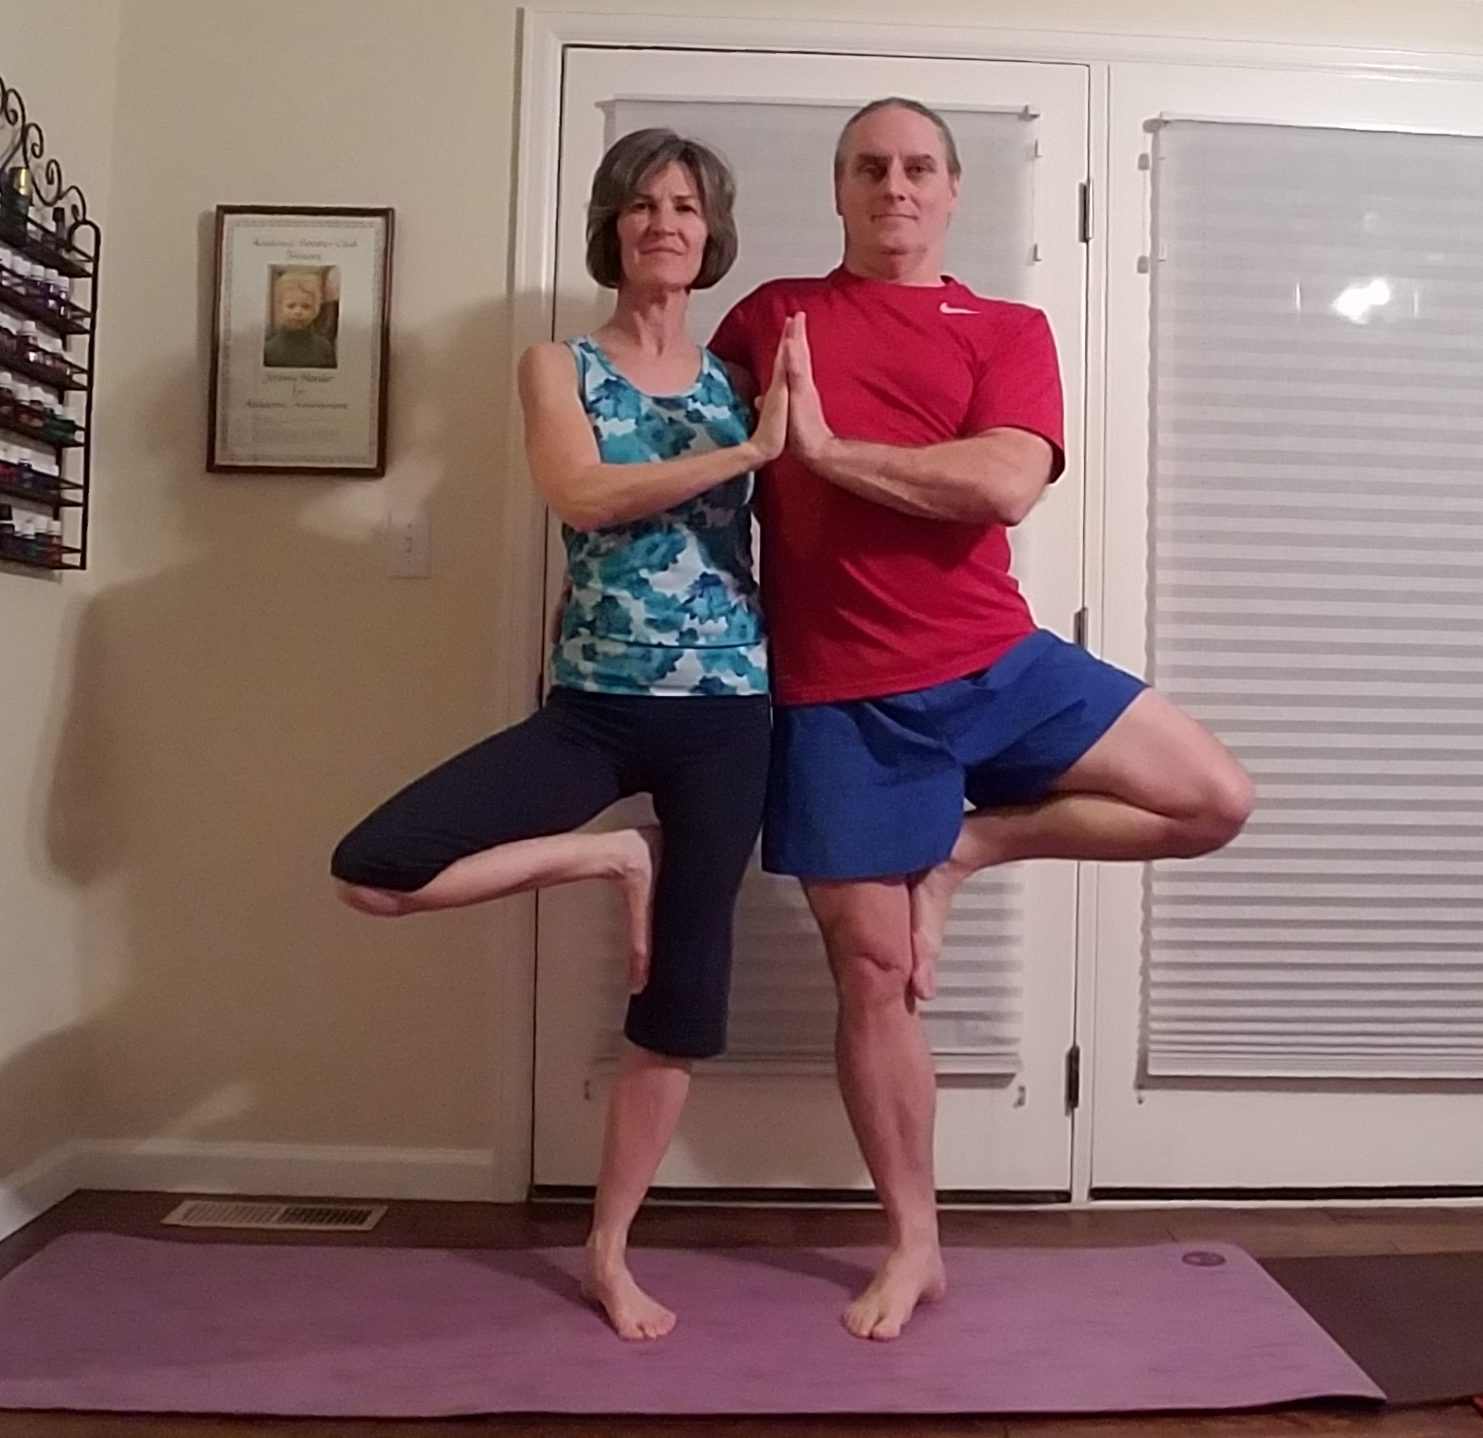 3 Ways to Do Yoga with a Partner - wikiHow Fitness